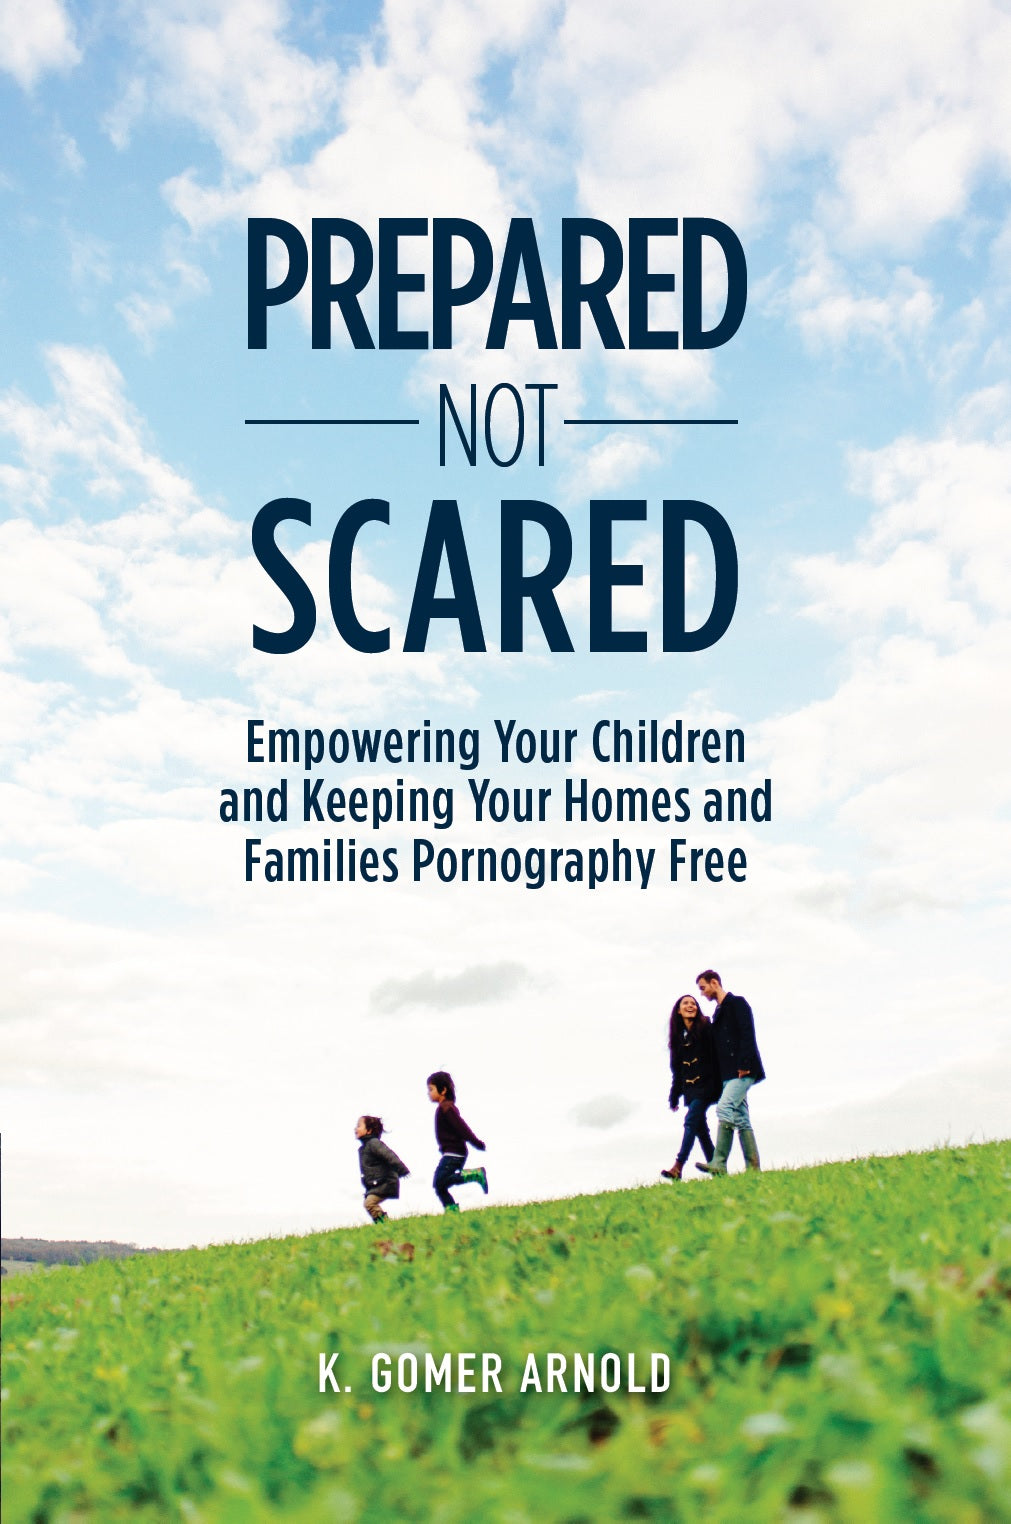 Prepared Not Scared: Empowering Your Children and Keeping Your Homes and Families Pornography Free